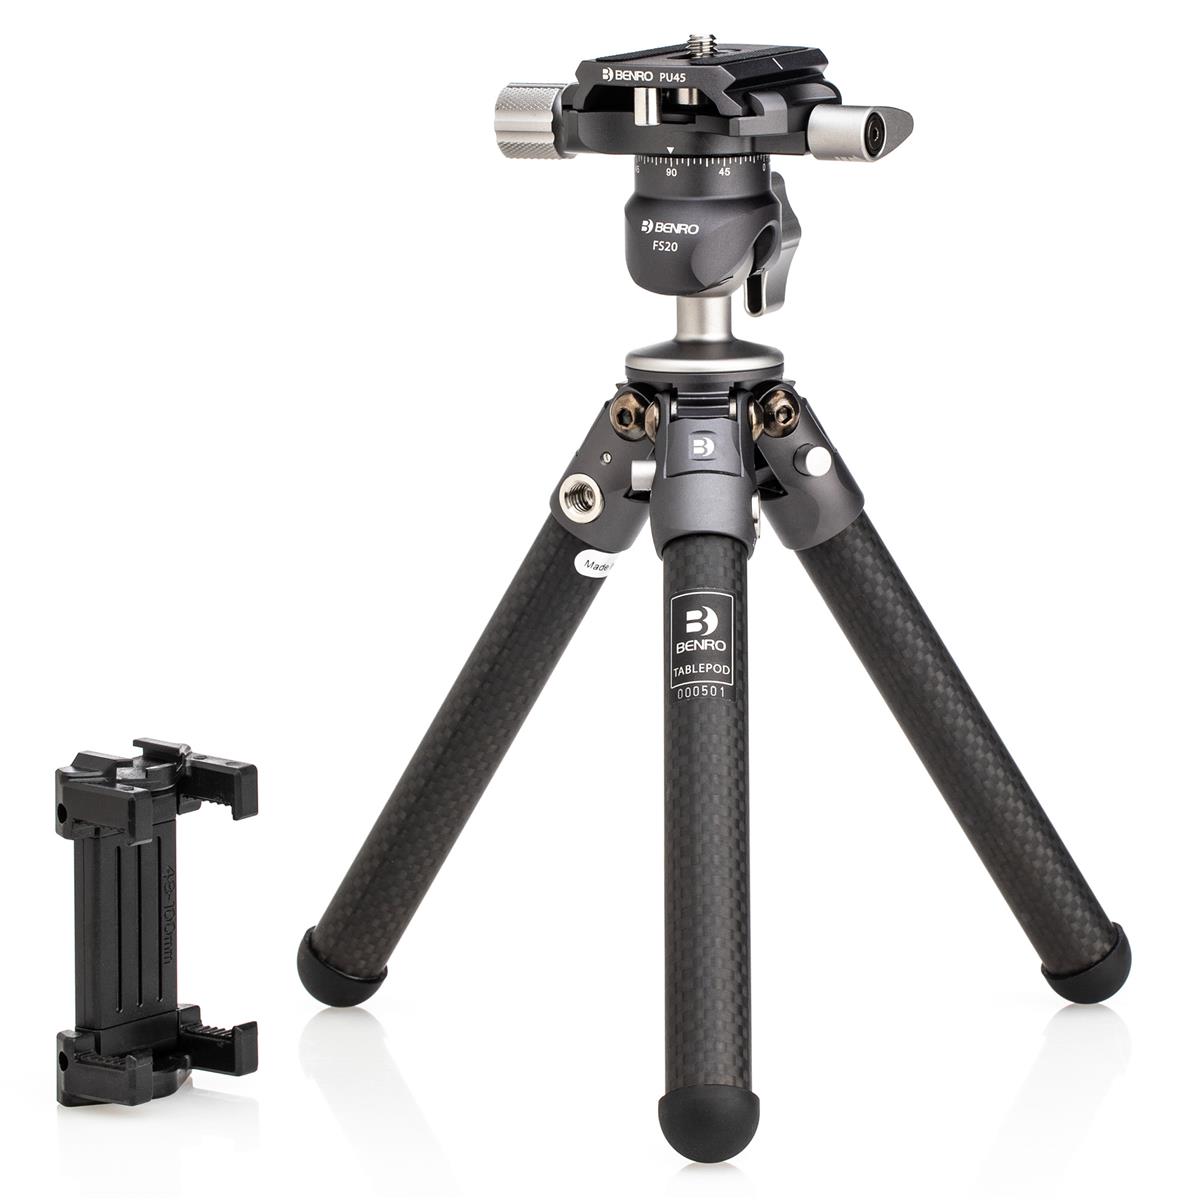 Image of Benro TablePod Carbon Fiber Tripod with Ball Head